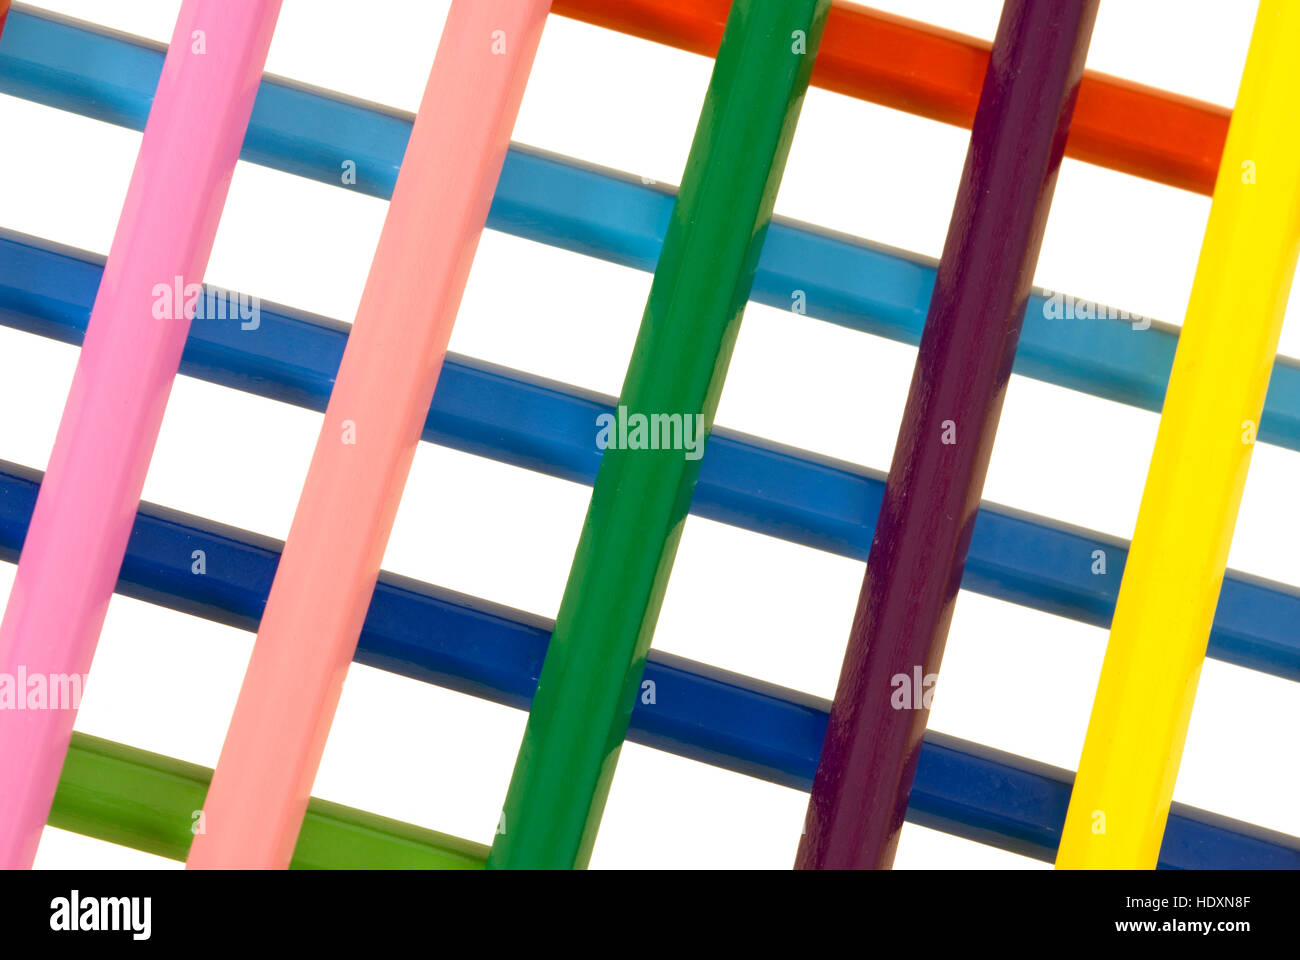 Coloured crayons Stock Photo